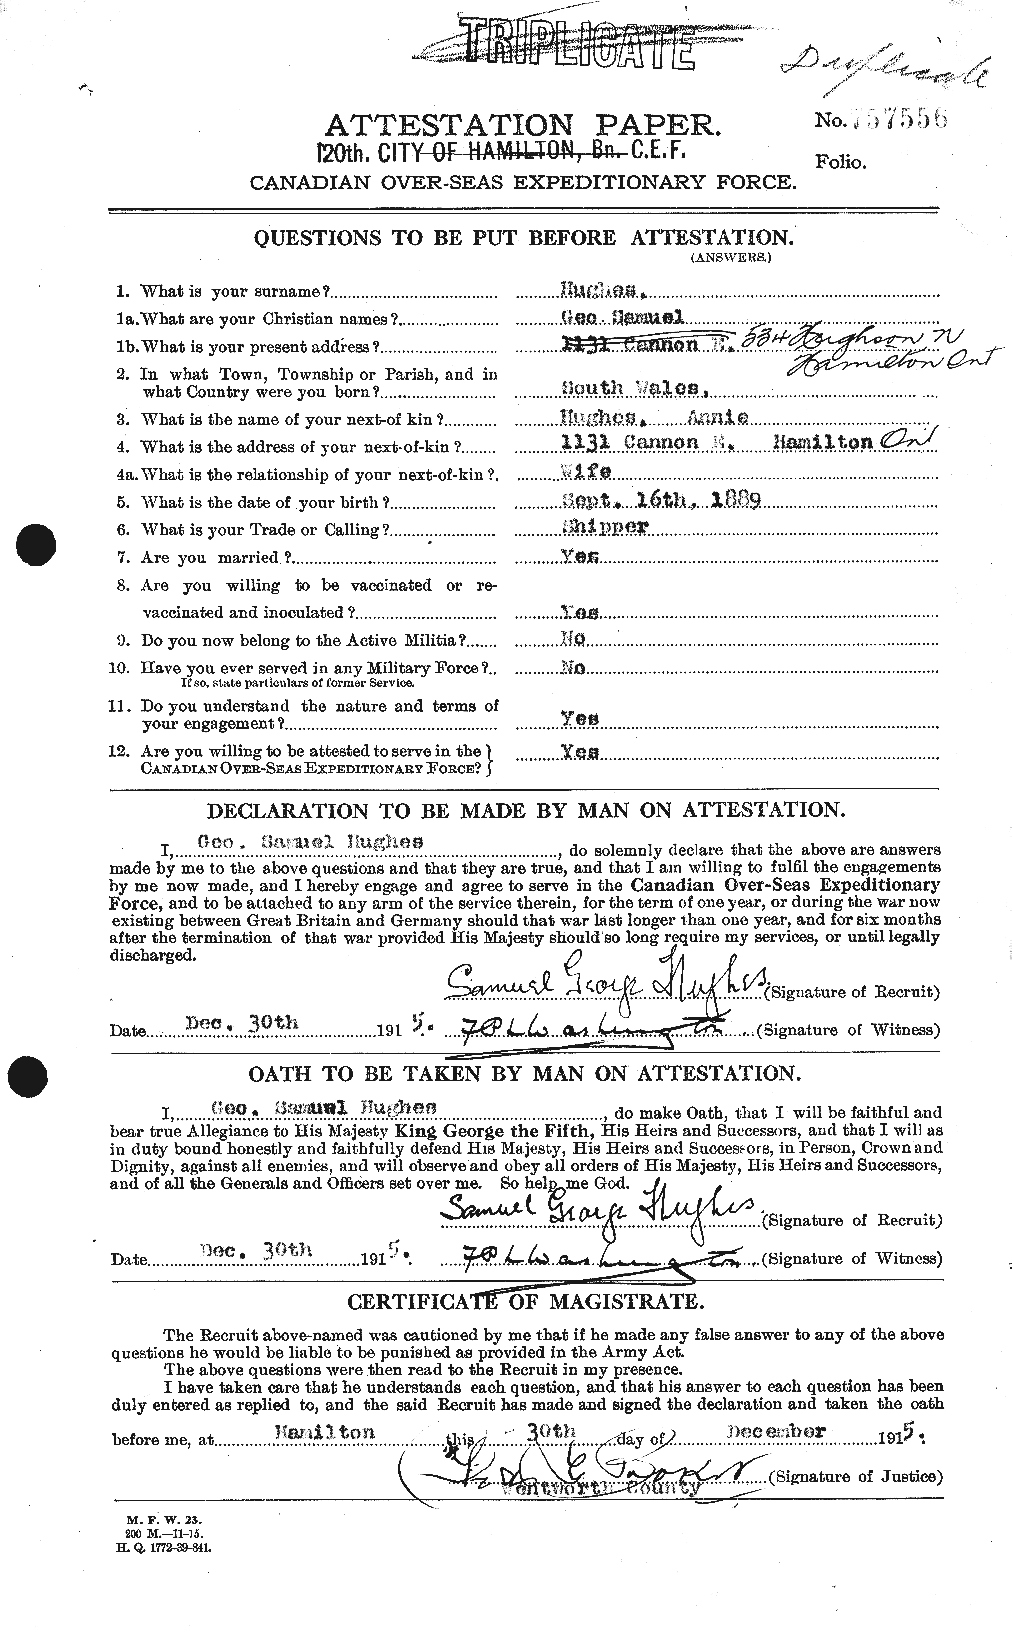 Personnel Records of the First World War - CEF 403835a